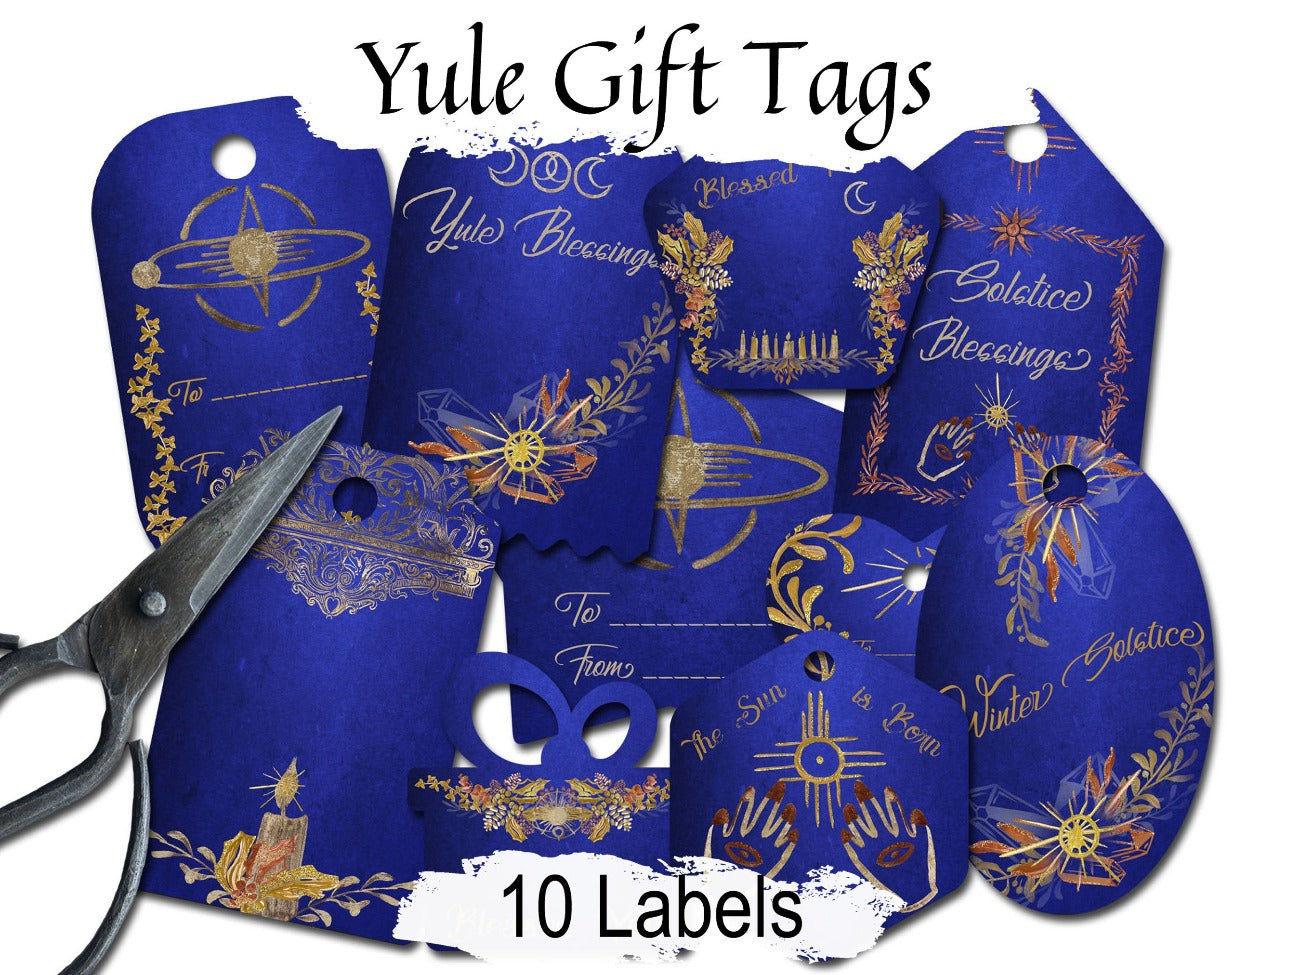 YULE GIFT TAGS 10 labels, Winter Solstice Christmas, Wicca Sabbat Printable, Printable Xmas Tags, Pagan Witch Gift Tags, Elegant Christmas - Morgana Magick Spell